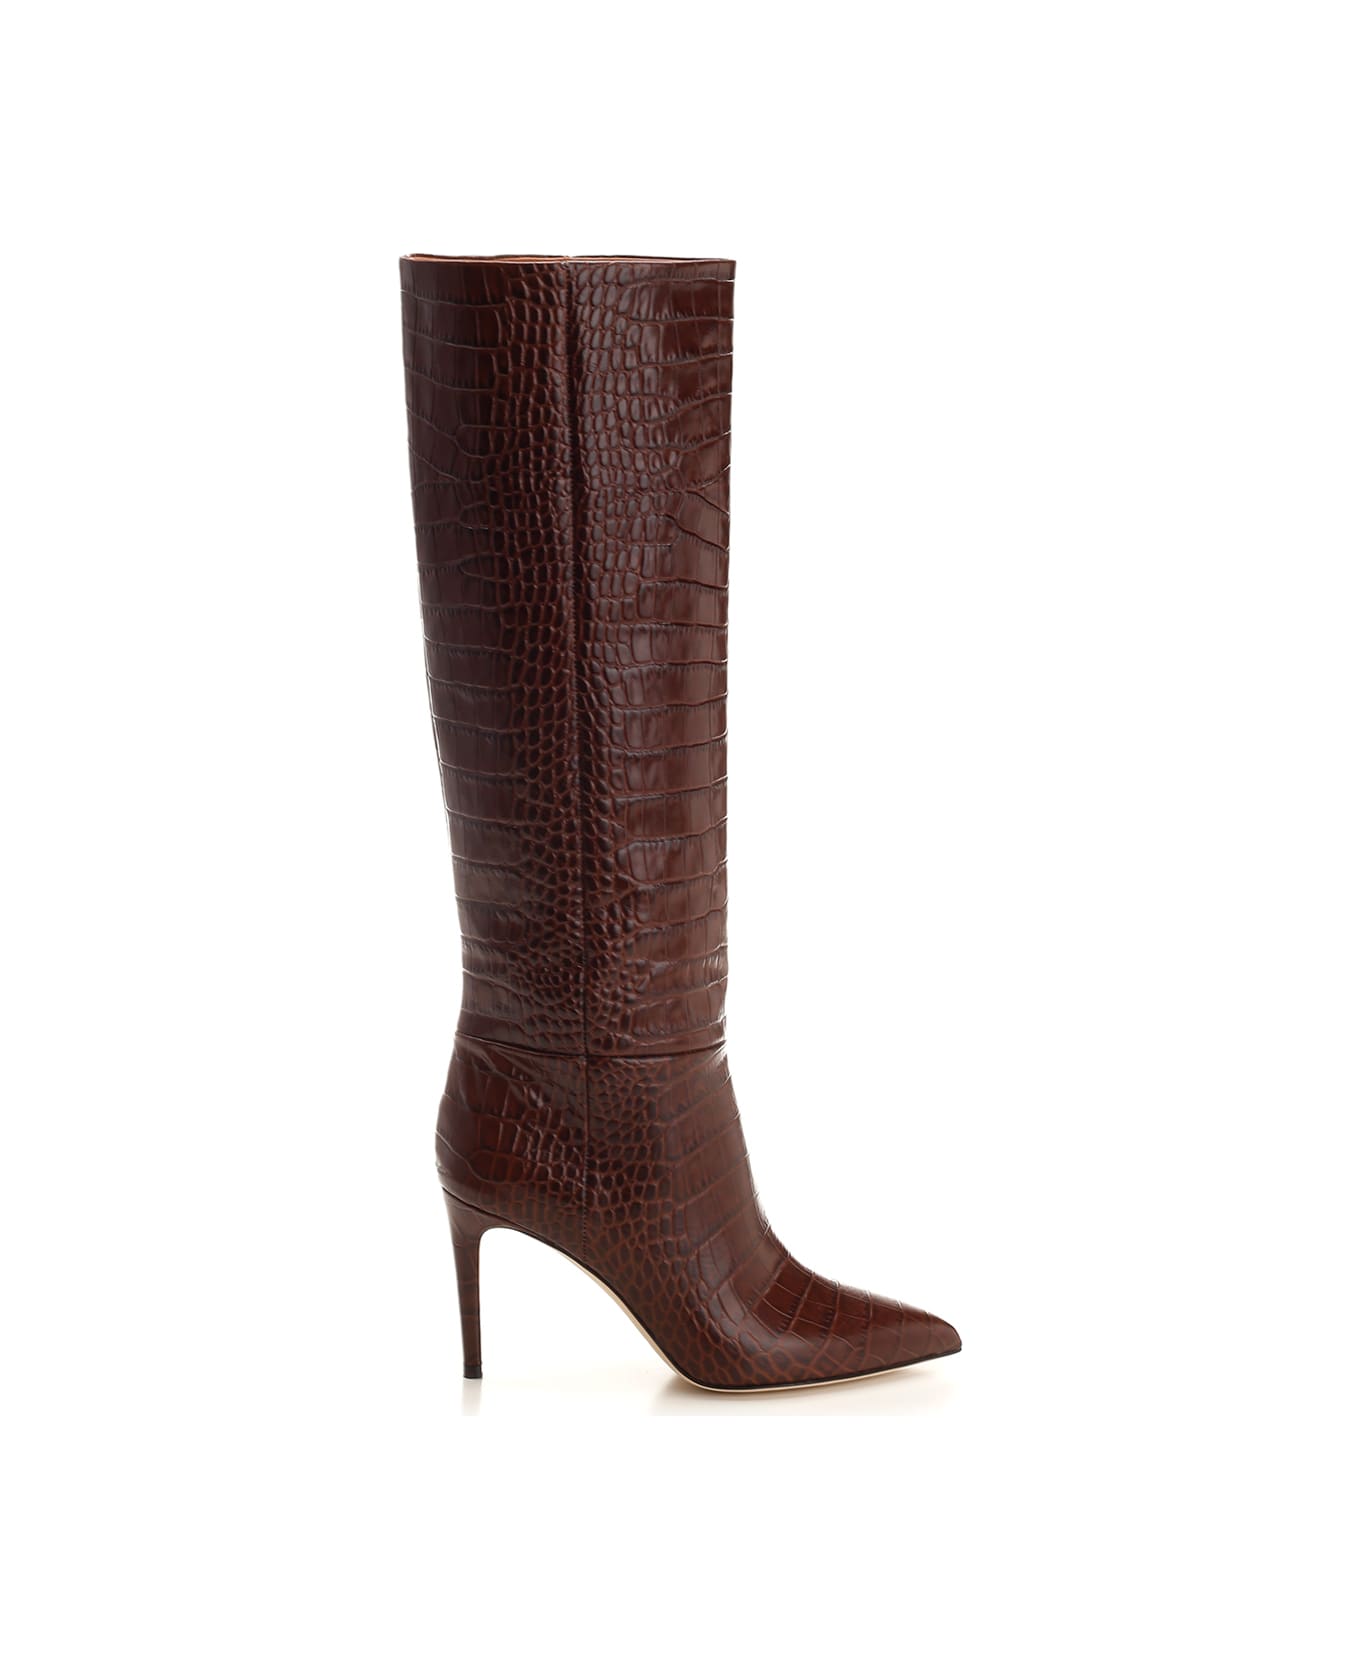 Paris Texas Embossed Leather Boots - BROWN ブーツ